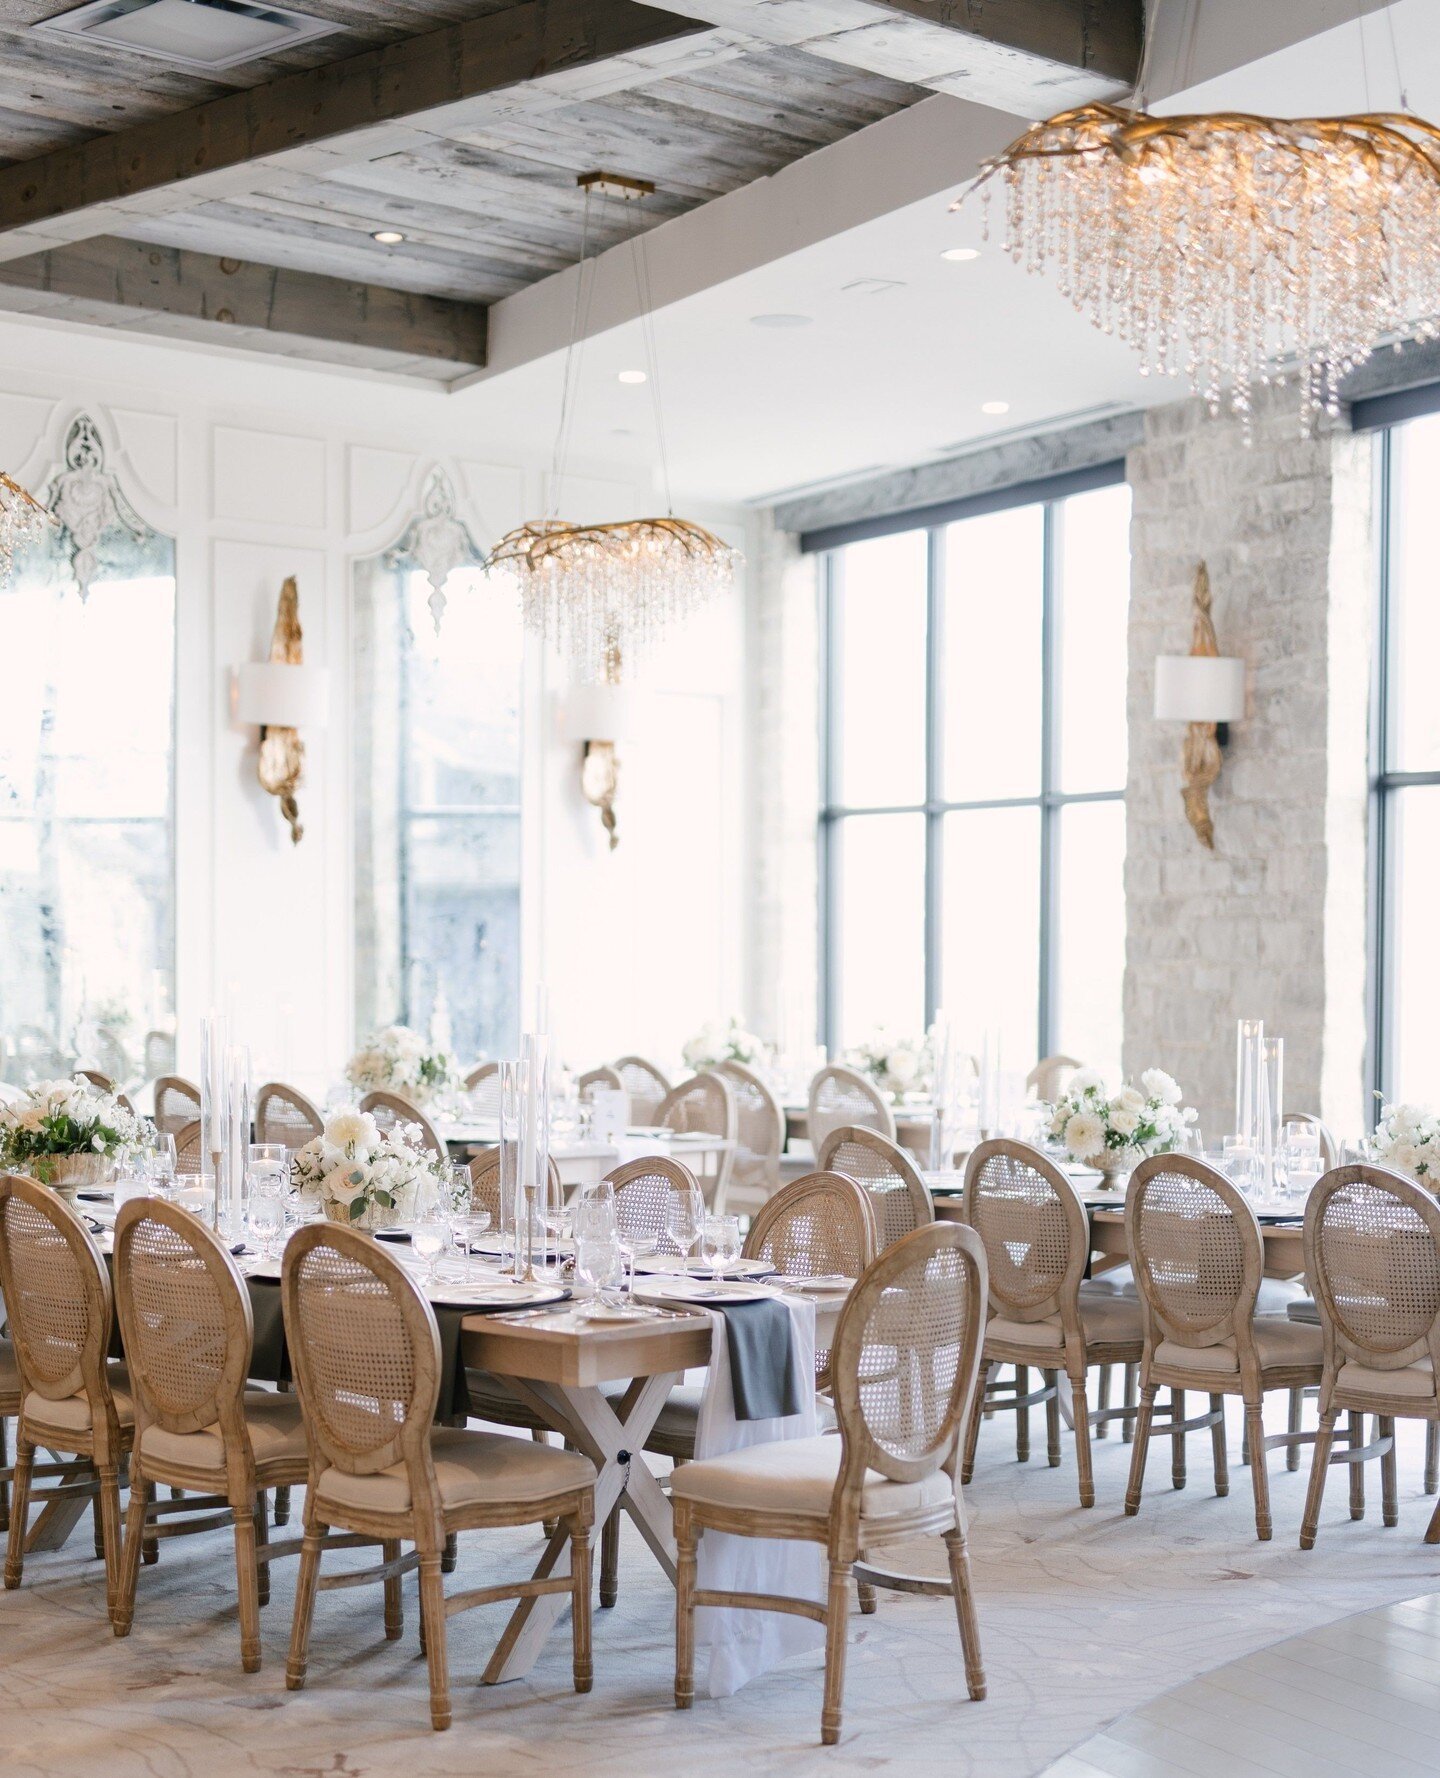 Reminiscing about this gorgeous and elegant wedding in Elora for T &amp; JP ✨️ all-white design can really elevate your overall wedding aesthetic!⁠
⁠
- - -⁠
⁠
Design &amp; Floral @freshlookdesigninc⁠
Venue @elora_mill⁠
Photography @shannonfordphoto ⁠